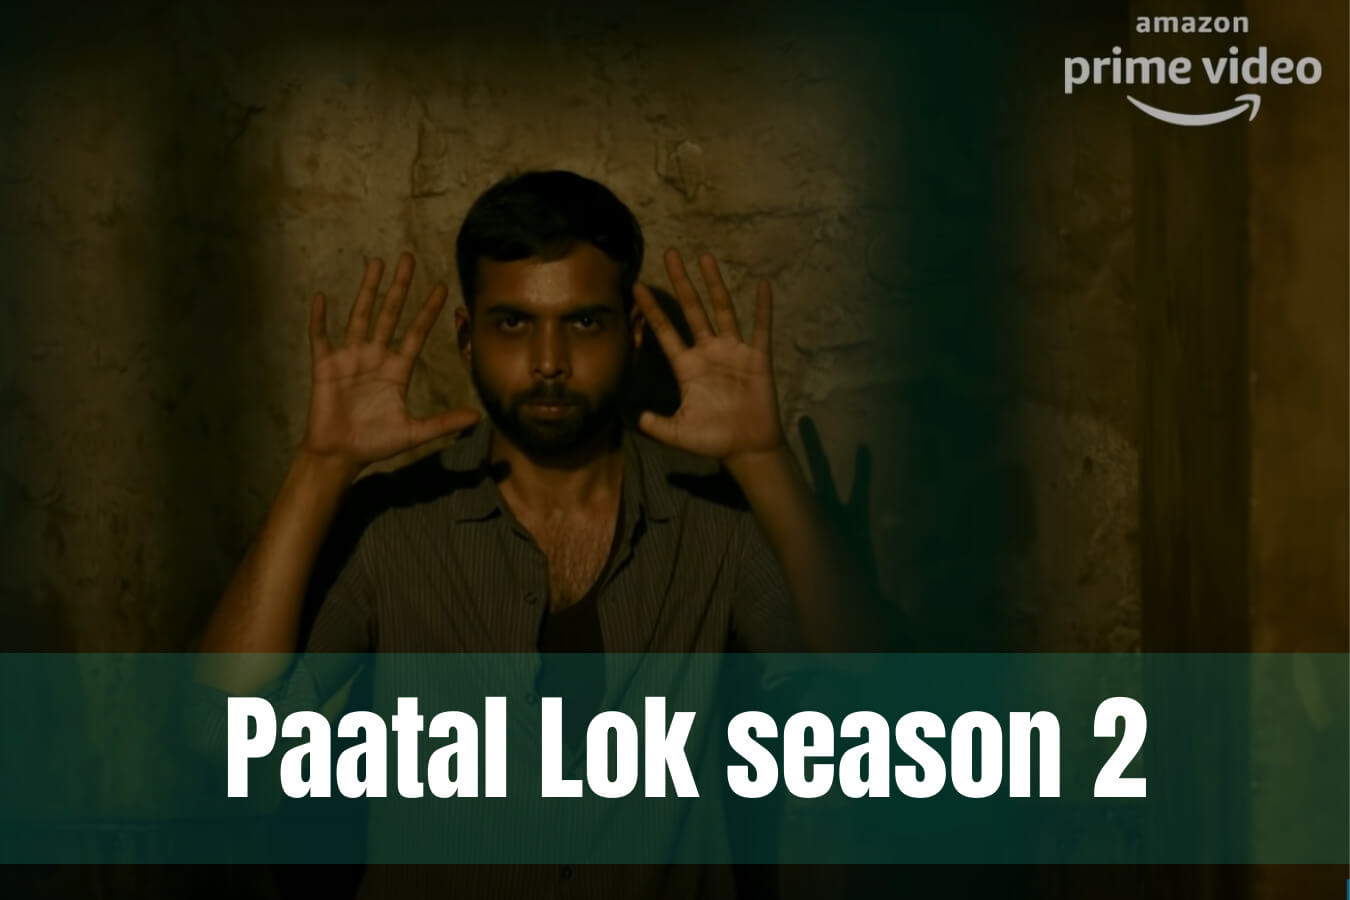 Will there be any Updates on Paatal Lok season 2 Trailer?